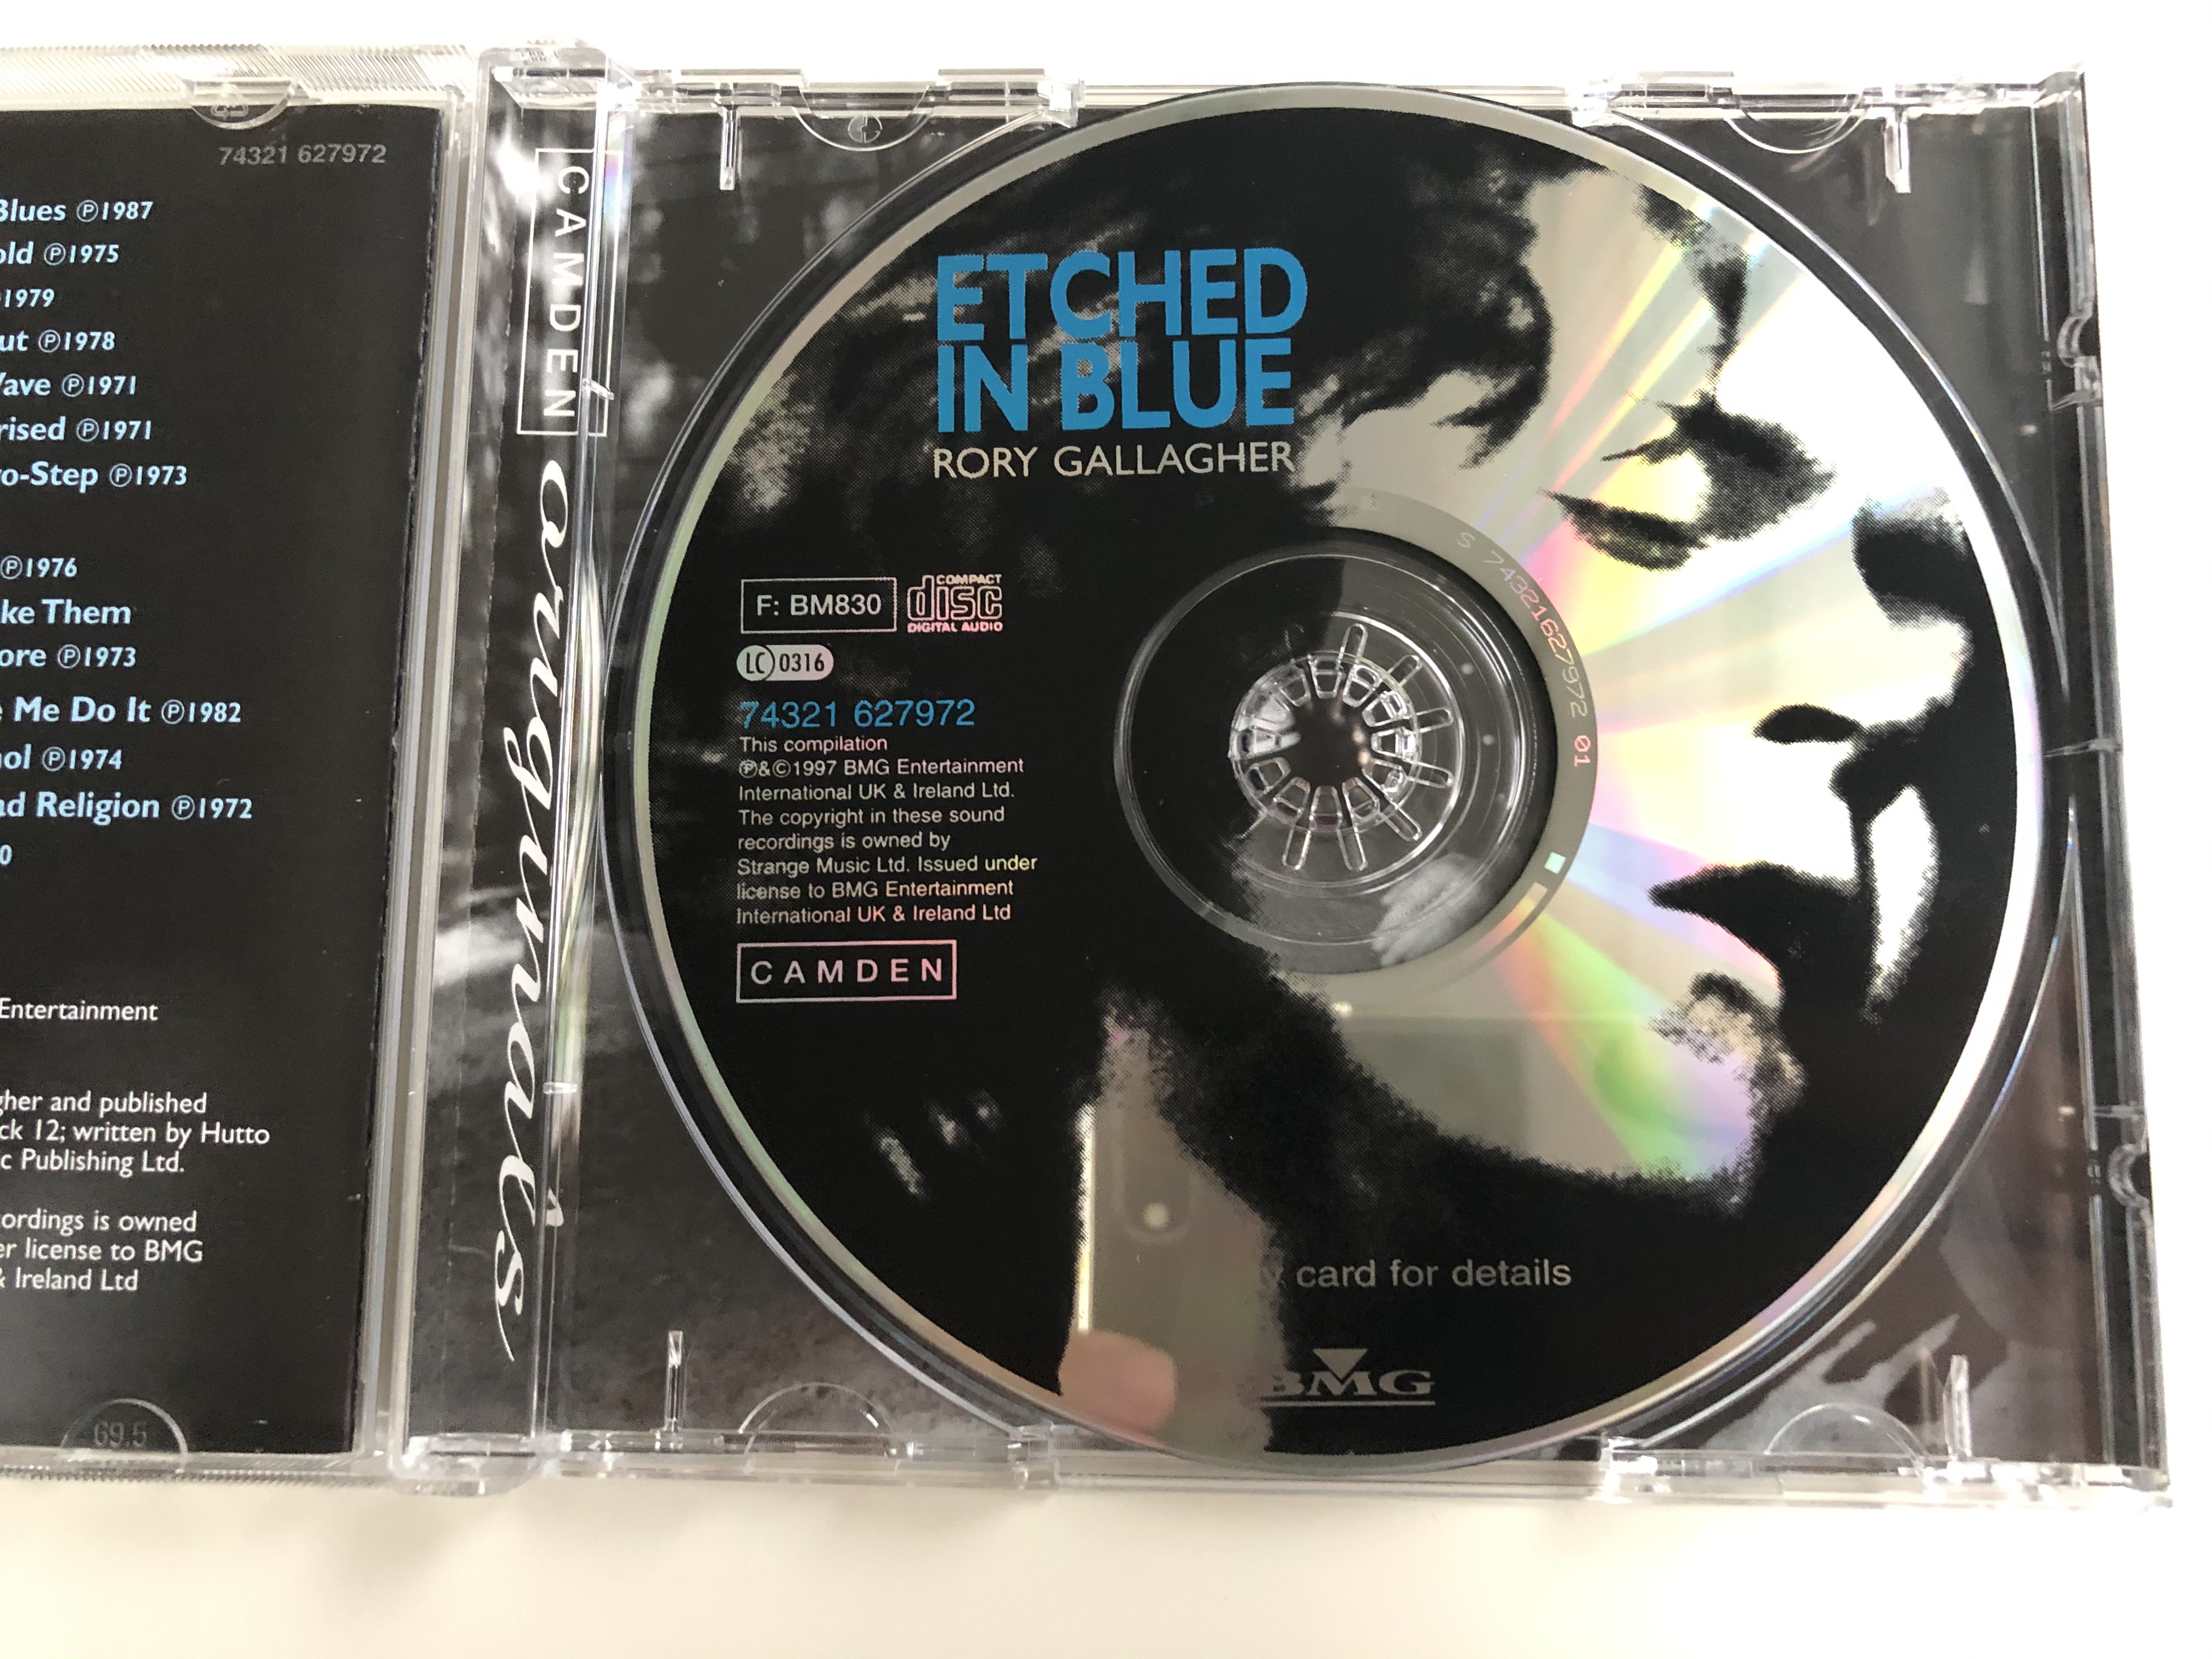 etched-in-blue-rory-gallagher-bmg-audio-cd-1997-74321-627972-5-.jpg